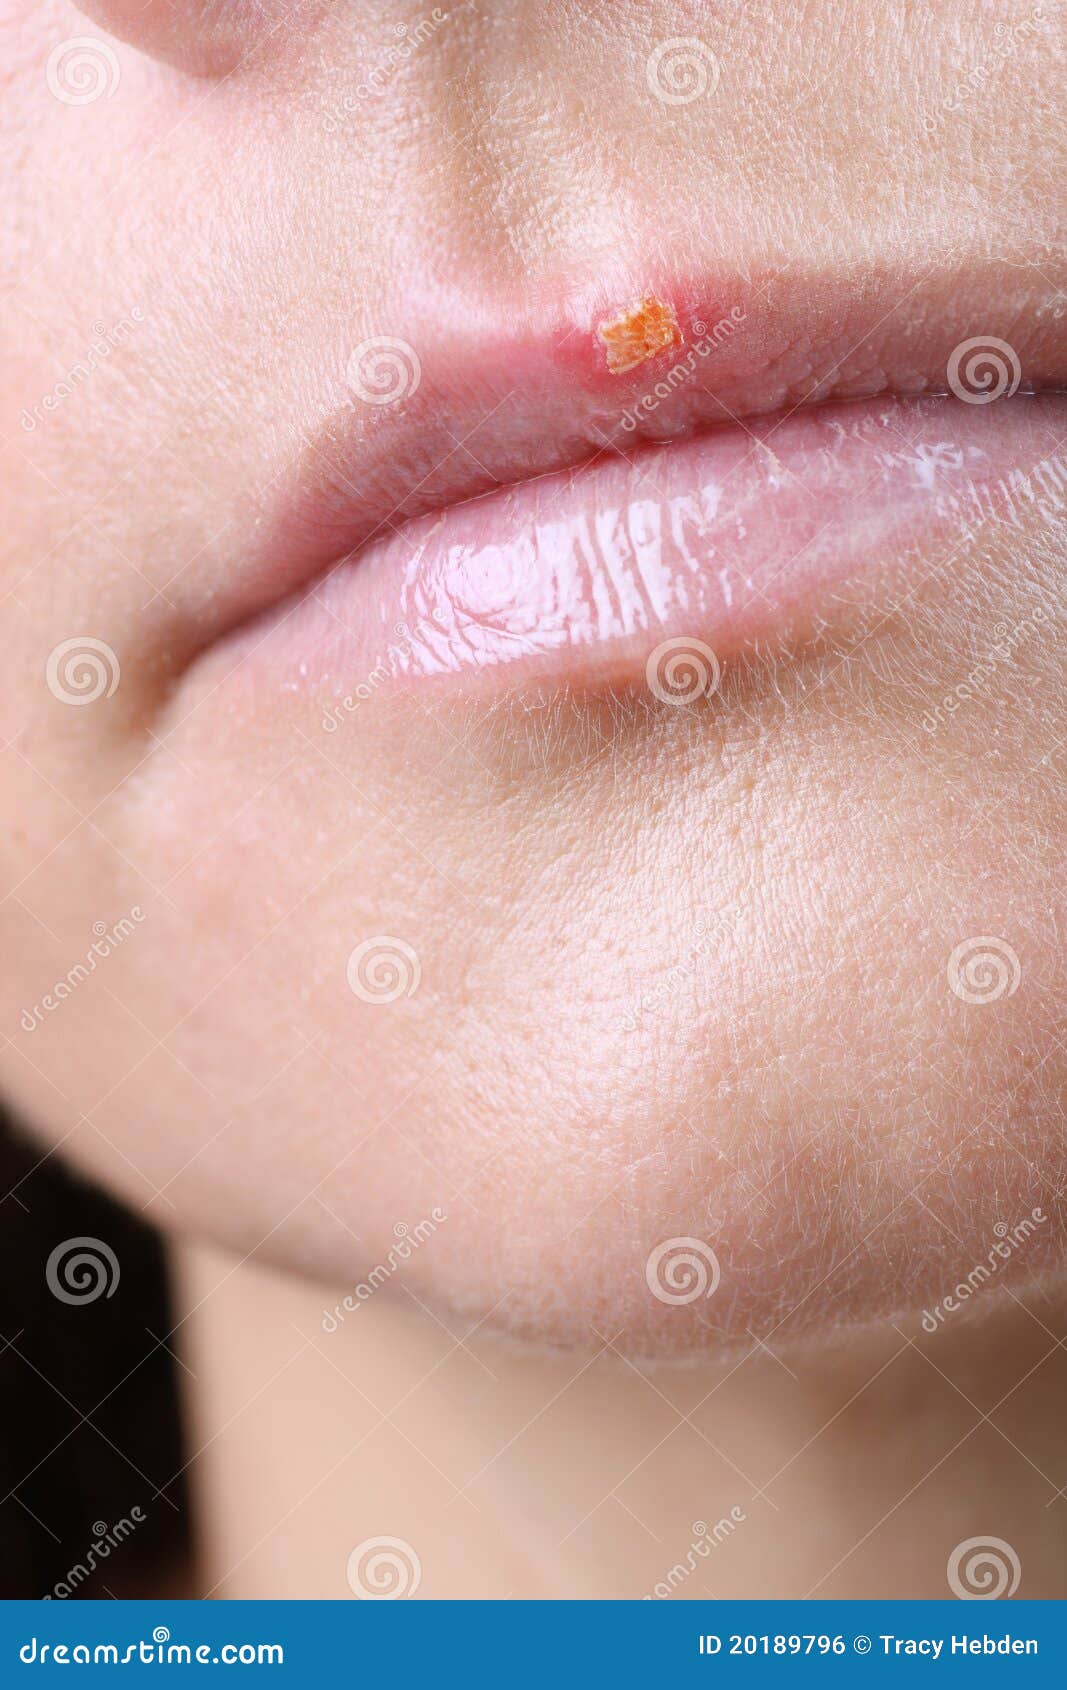 Herpes Simplex Infections | Herpes.org